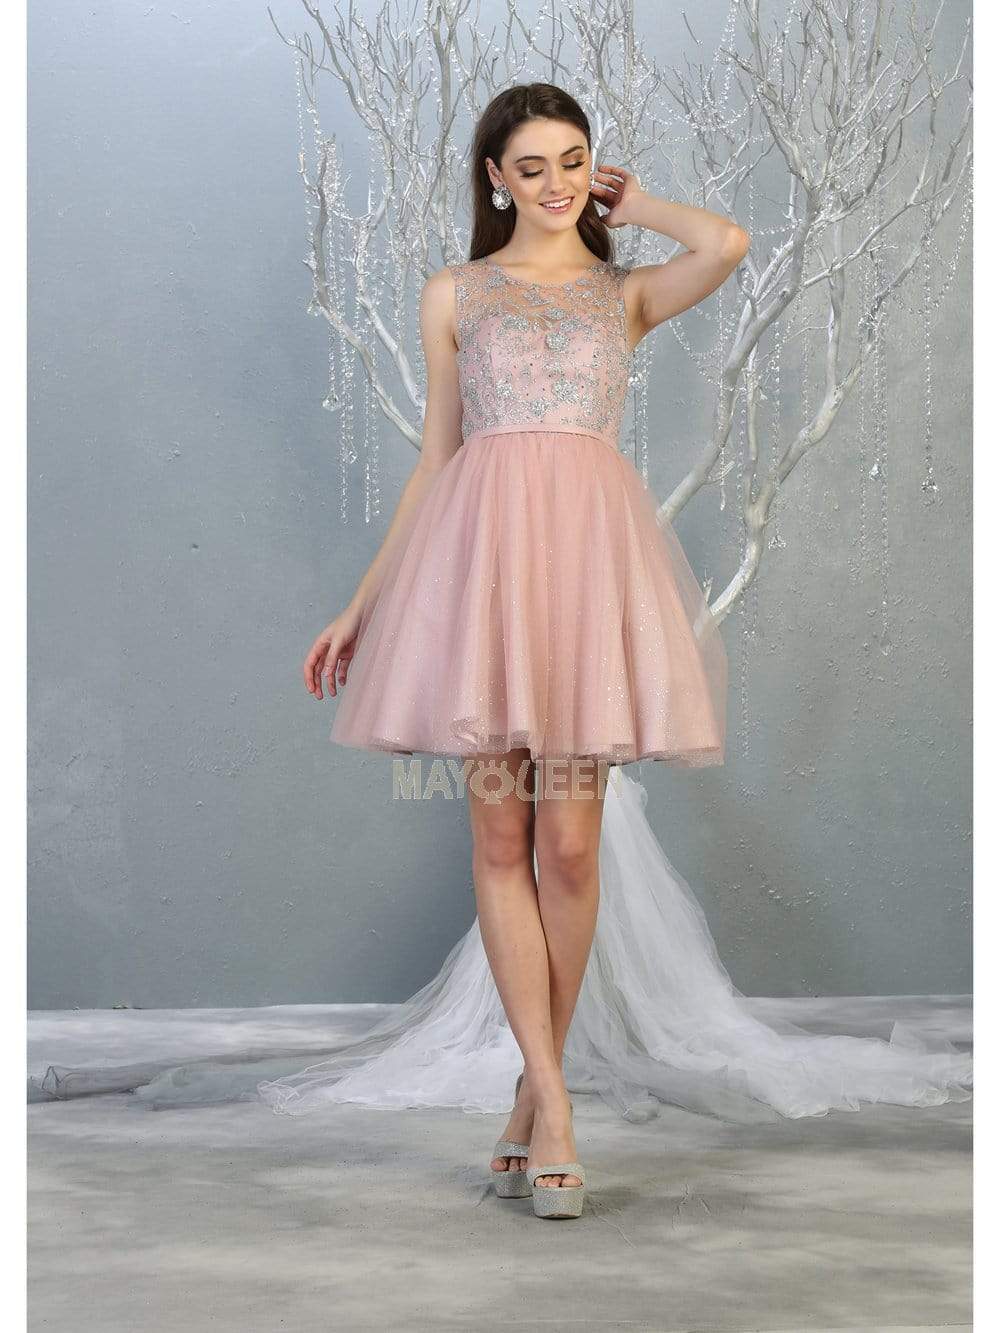 May Queen - MQ1803 Illusion Sweetheart Neckline Glitter Tulle Dress Homecoming Dresses 2 / Blush